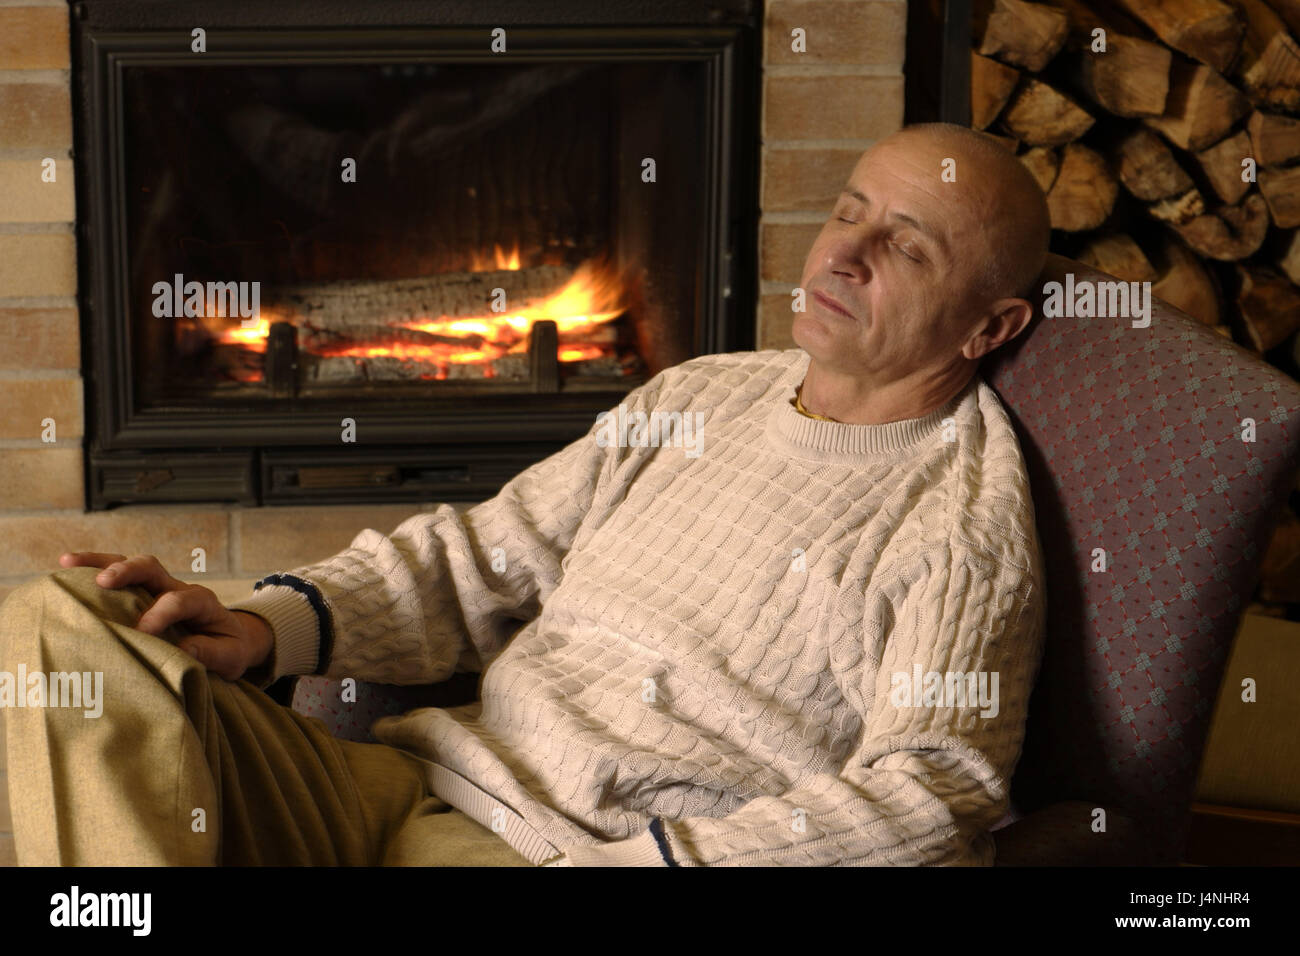 Living square, open fire, boss, sit, sleep, rest curled, people, senior citizens, man, détente, rest, take it easy, enjoy, fatigue, depletion, only, cosiness, heat, kiln, fires, flames, wooden kiln, chimney, Stock Photo